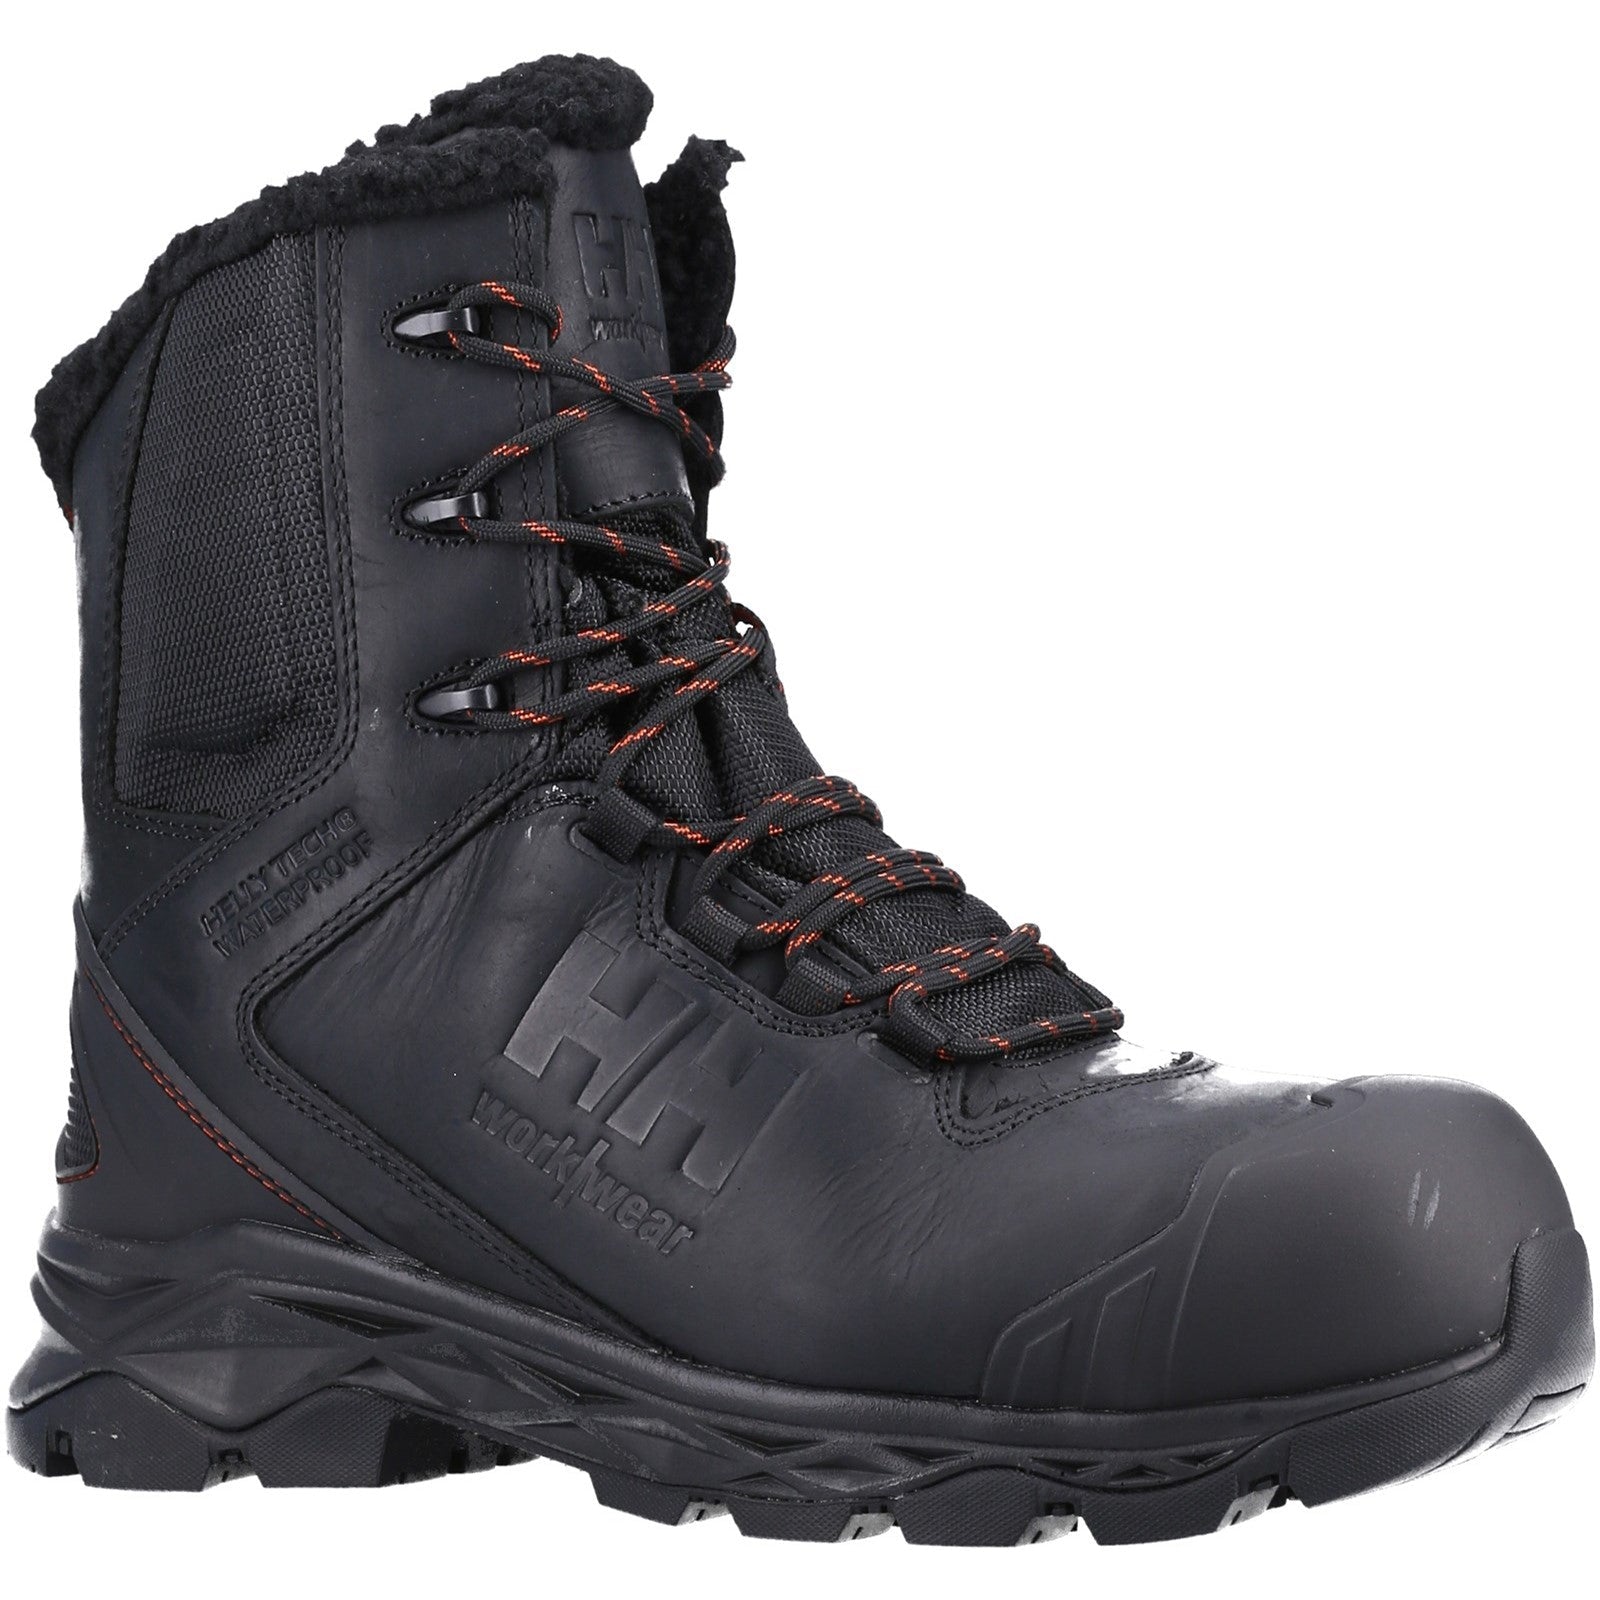 Helly Hansen Oxford Winter Tall Side-Zip S3 Safety Boot S3 Black